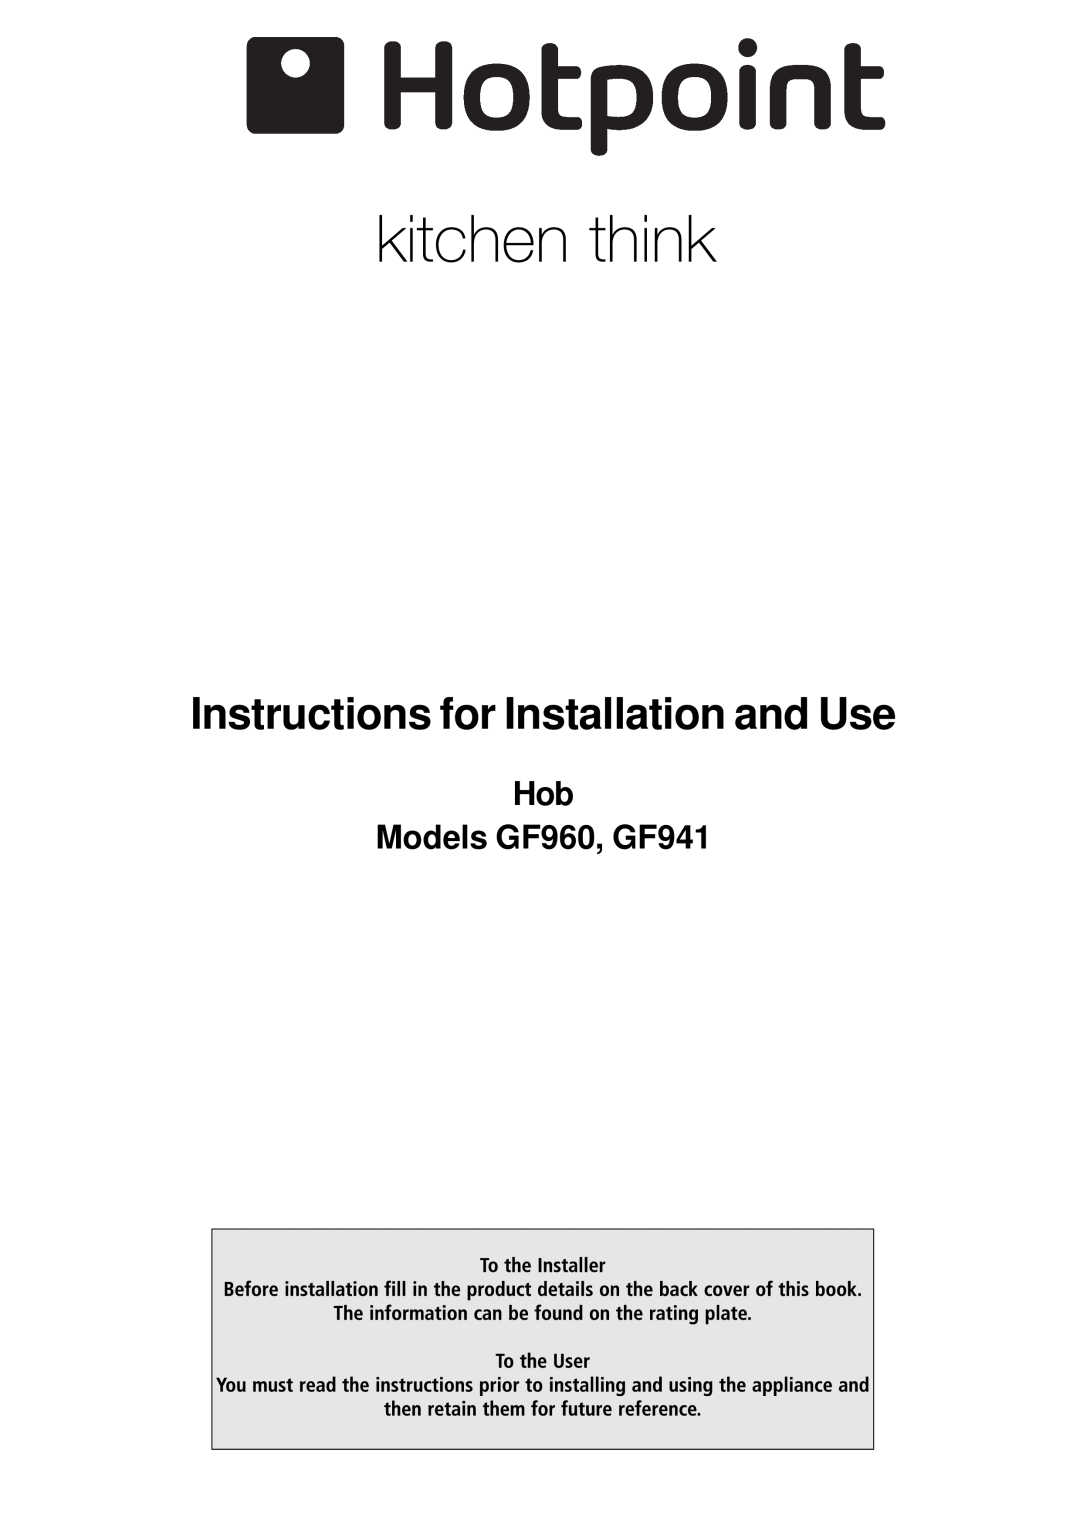 Hotpoint manual Hob Models GF960, GF941, Instructions for Installation and Use 